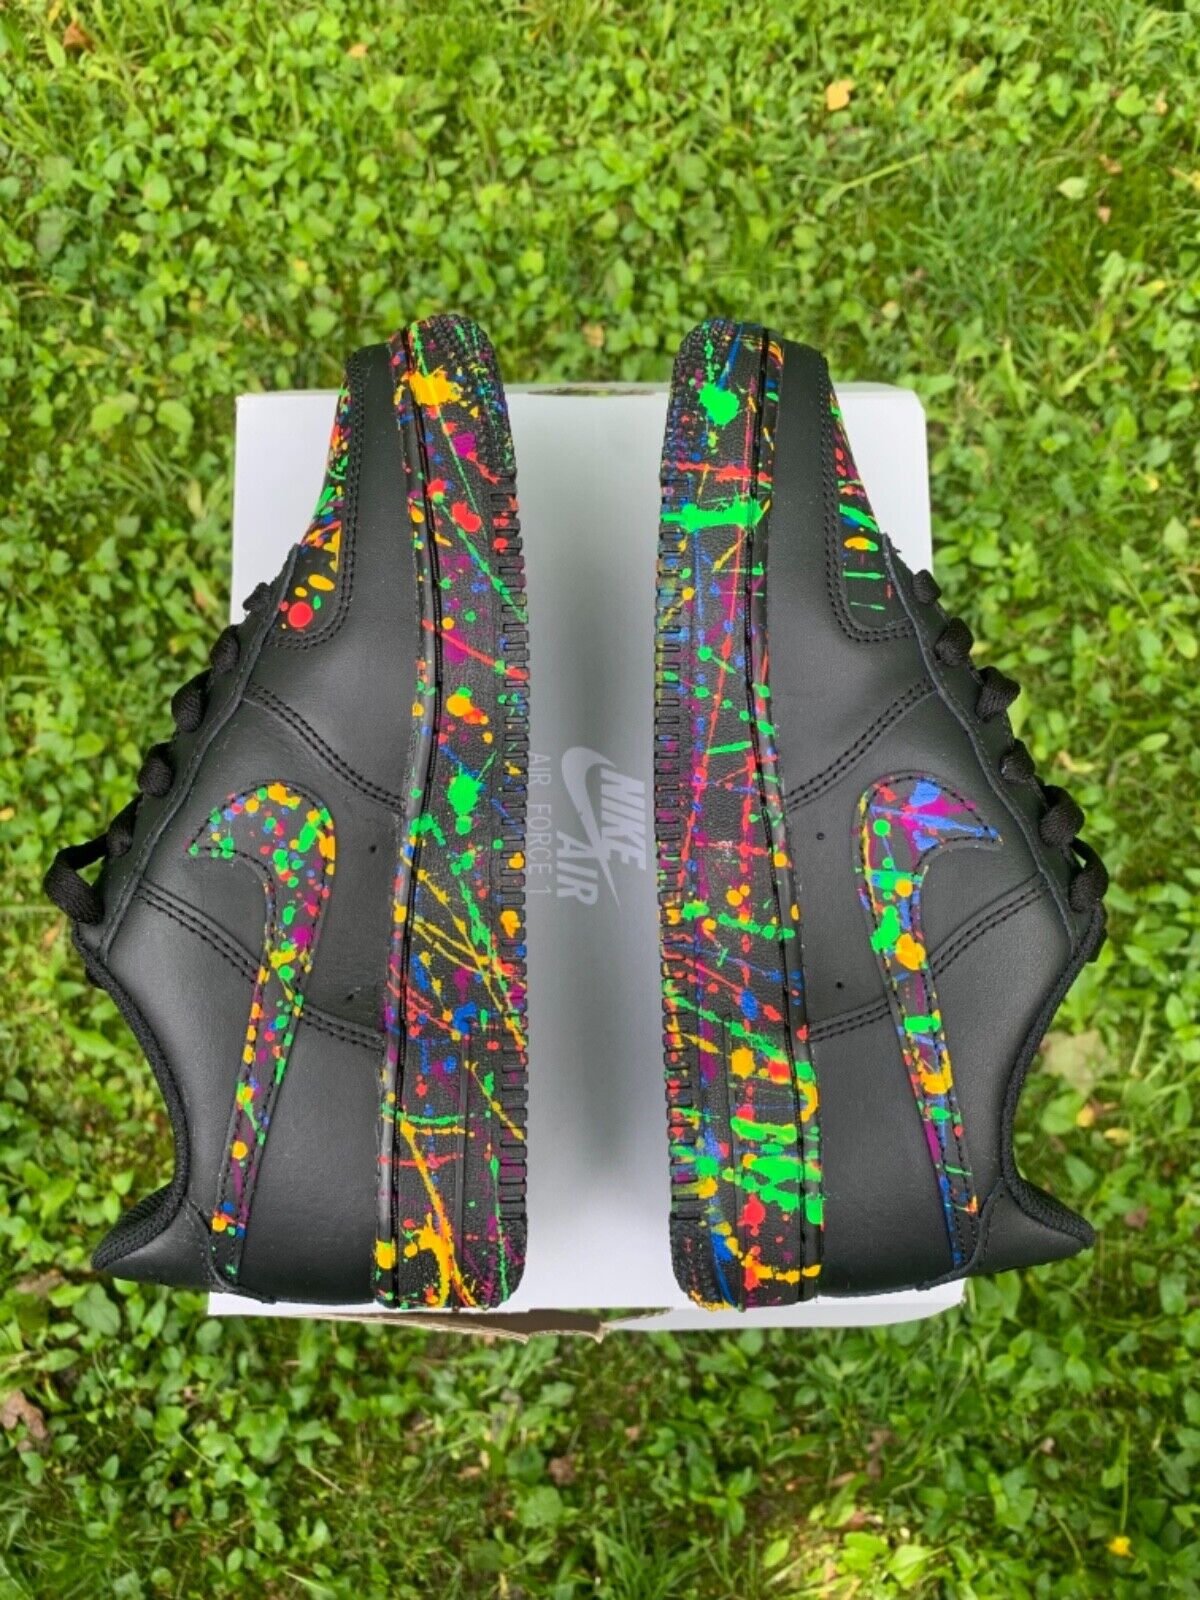 Air Force 1 Custom Shoes Black Neon Outline Blue Green Yellow Pink All Sizes Af1 Sneakers 11.5 Mens (13 Women's)